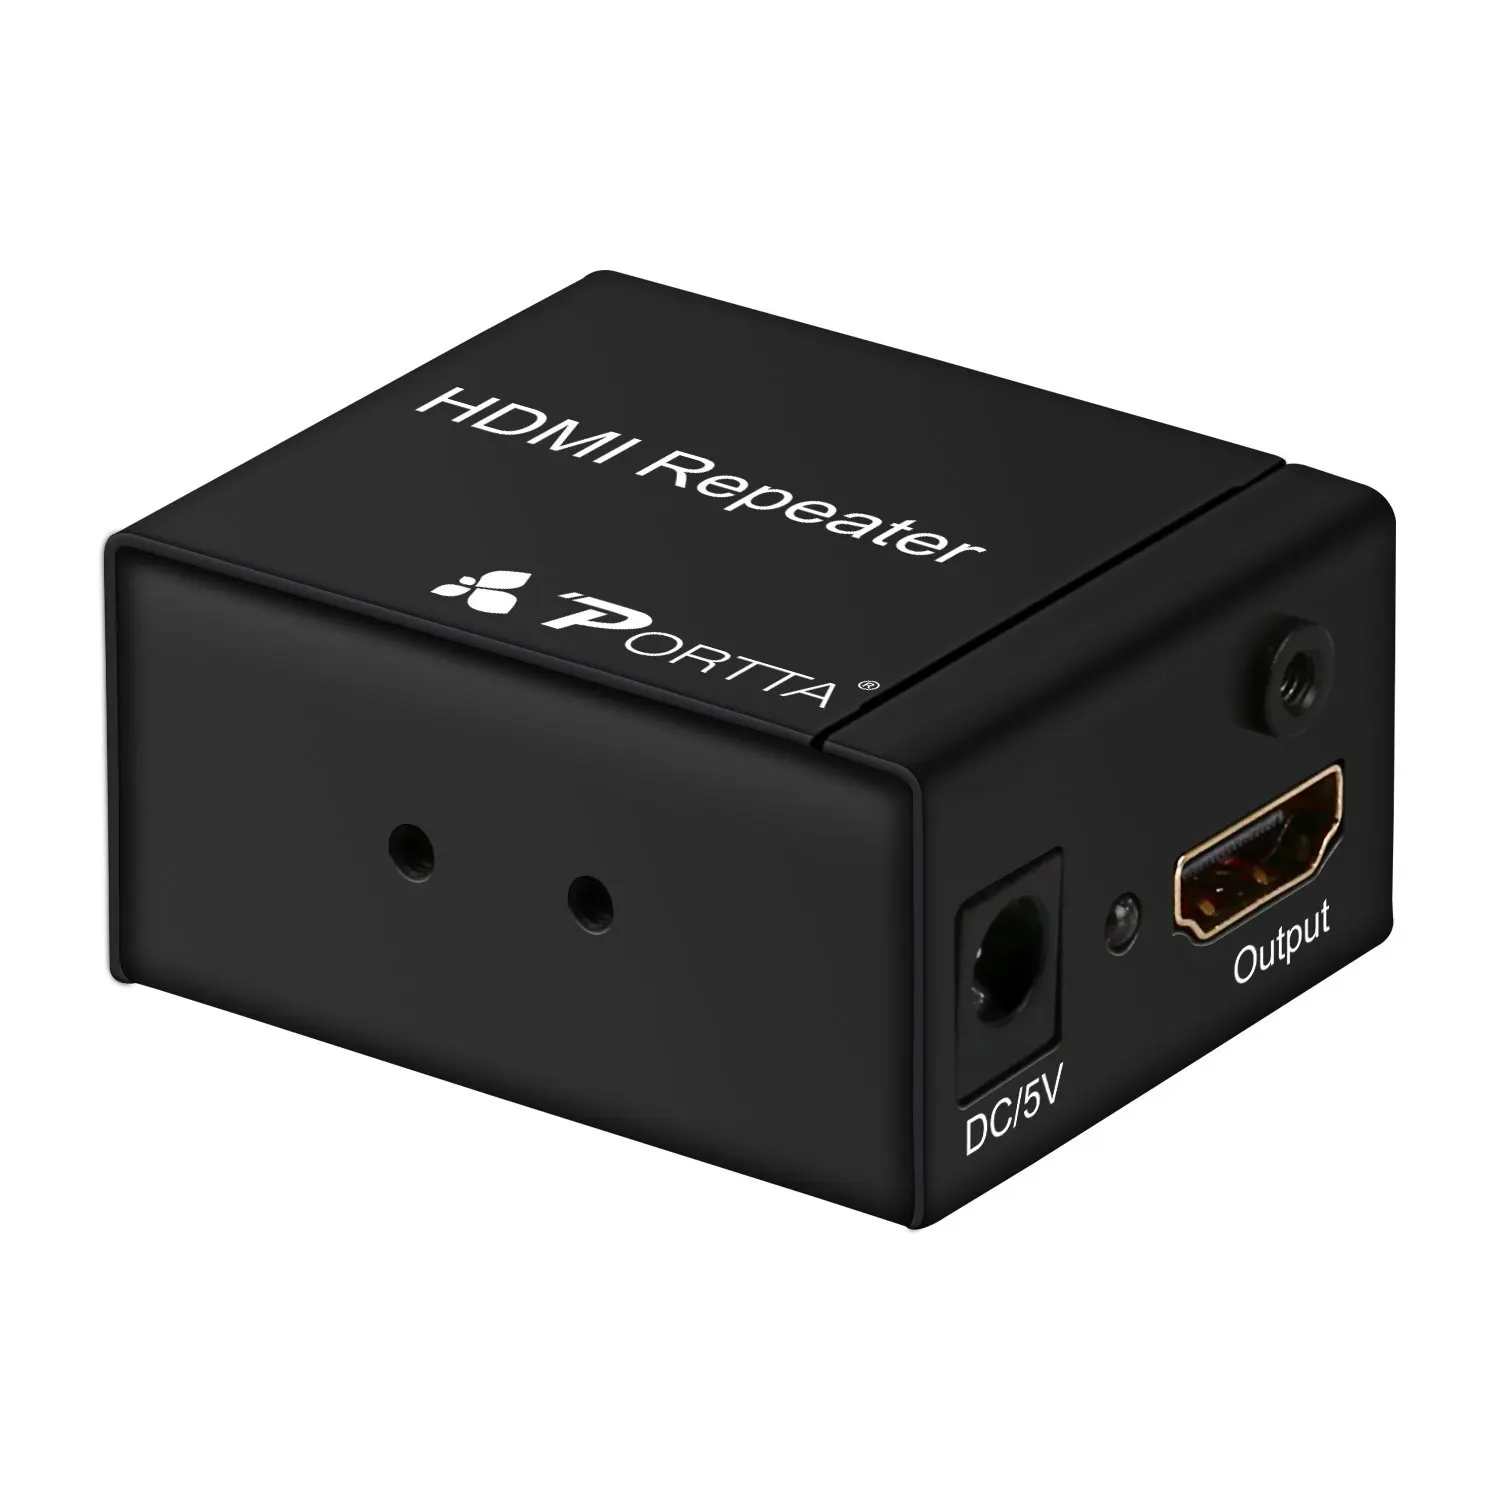 TOP Series Connections up to 40m, female to female, Full HD 1080p KabelDirekt HDMI Repeater